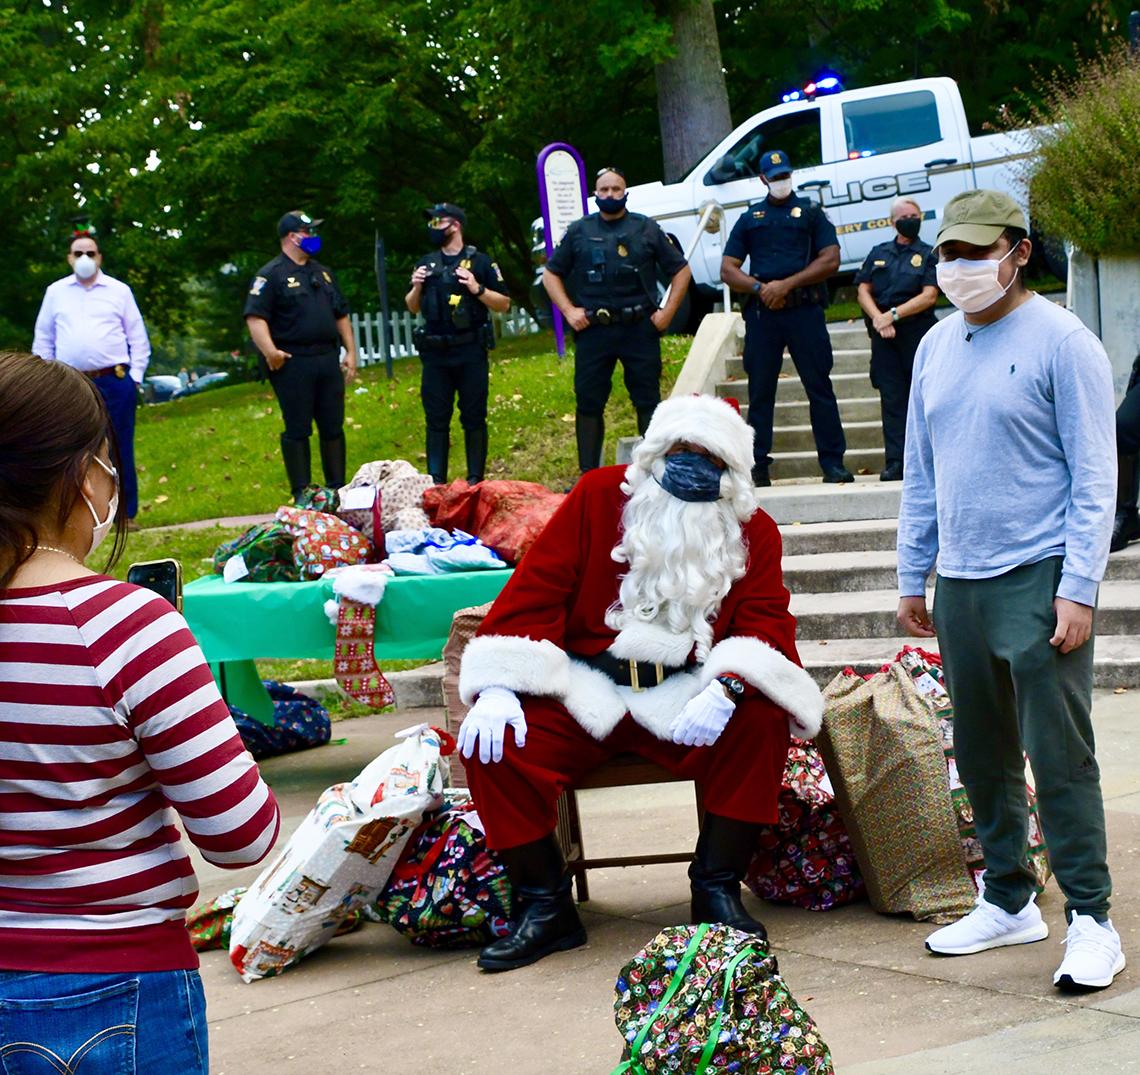 A woman takes a photo with her iphone of a young man wearing a blue longsleeve shirt and Santa.